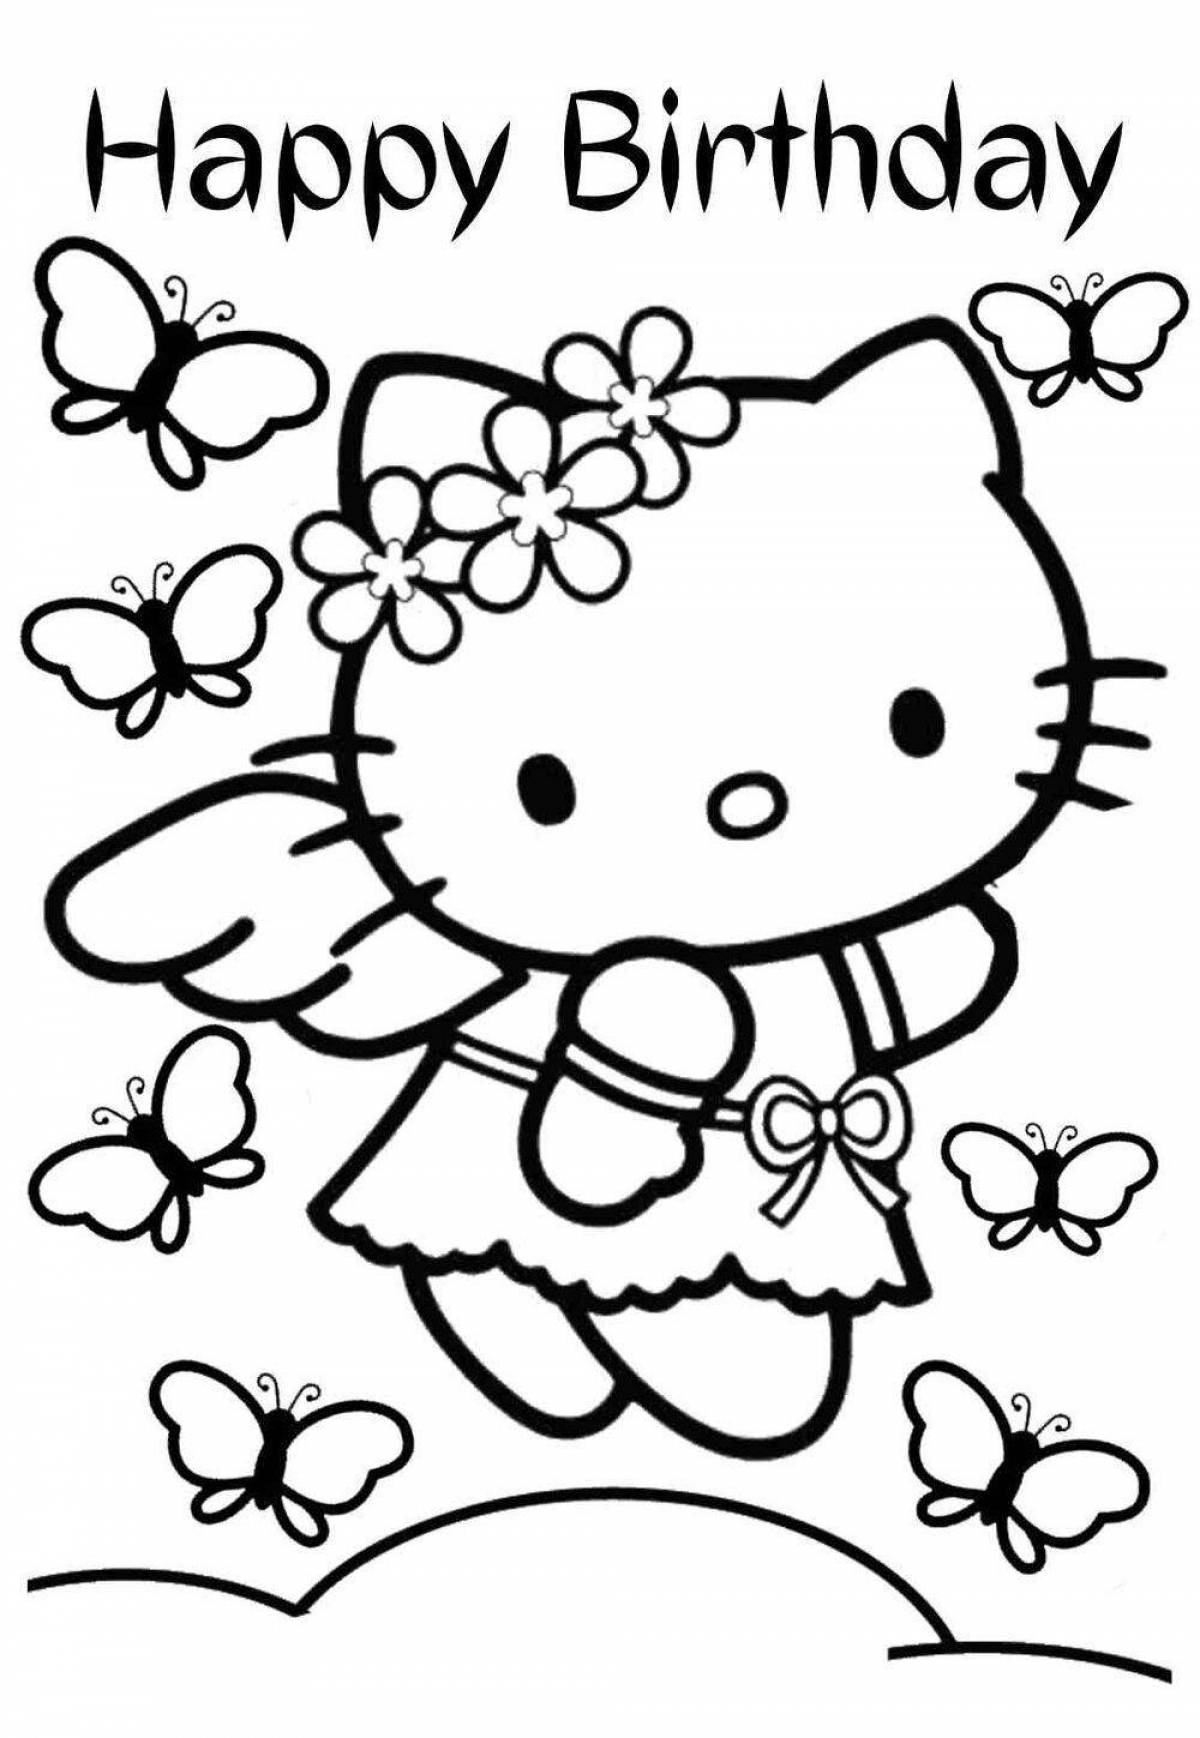 Exquisite coloring hello kitty with heart